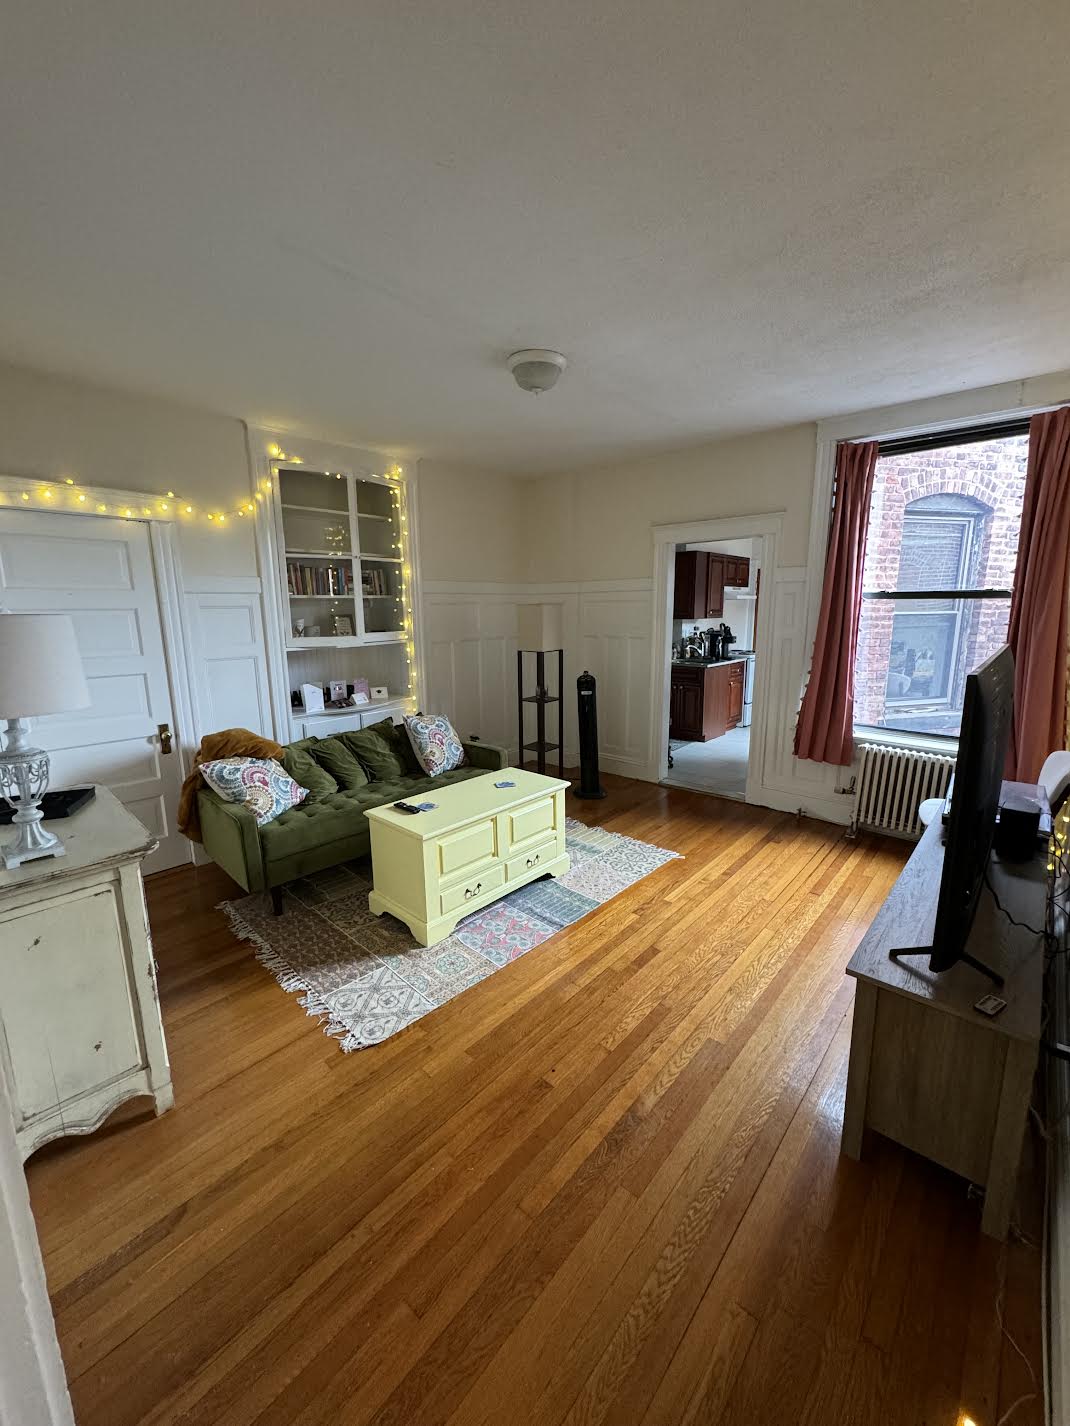 Photos of apartment on Orkney Rd.,Boston MA 02135